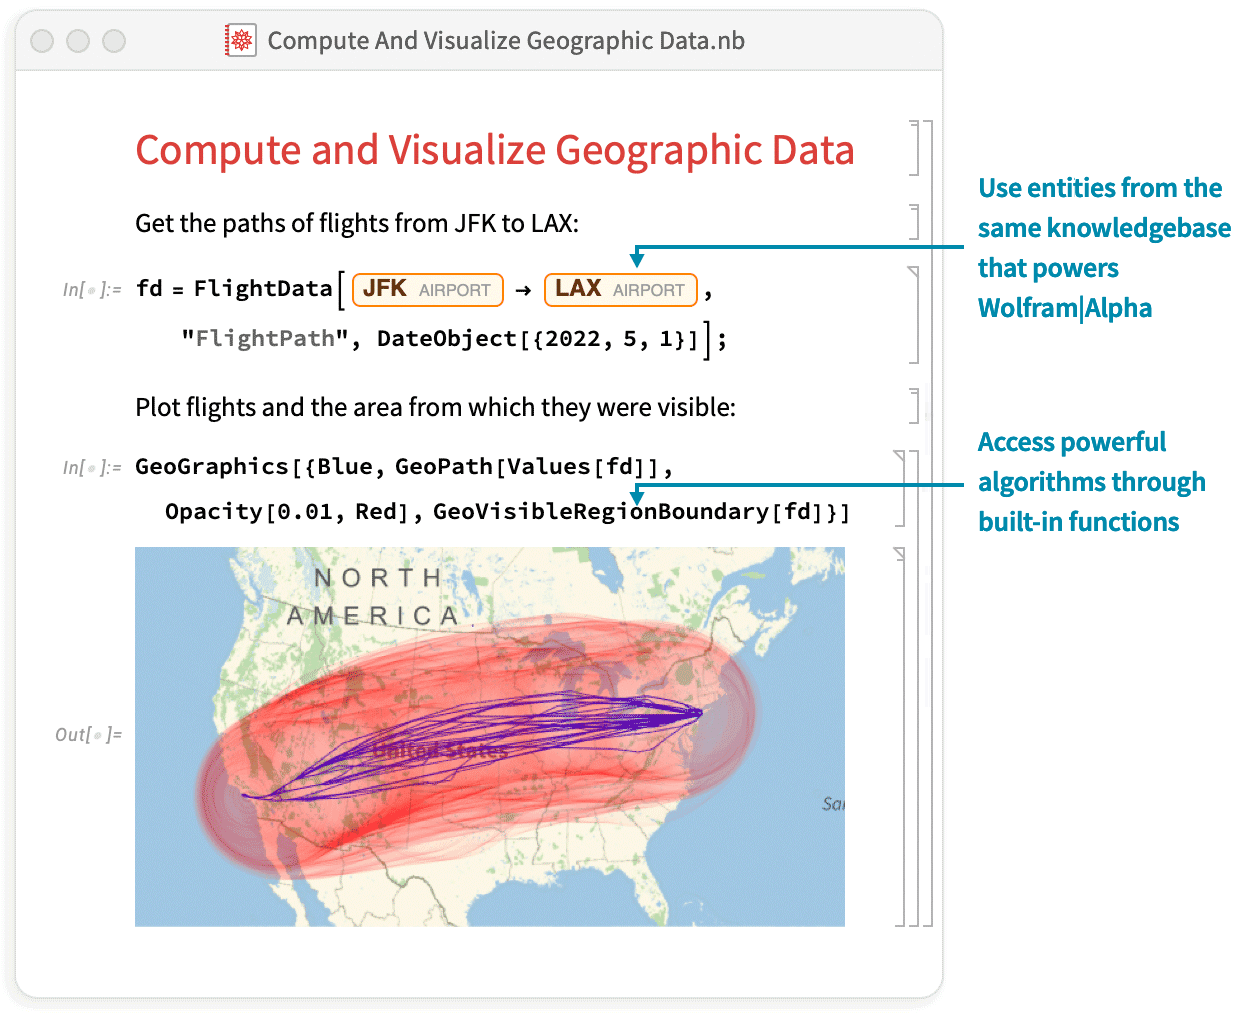 Compute an Visualize Geographic Data notebook